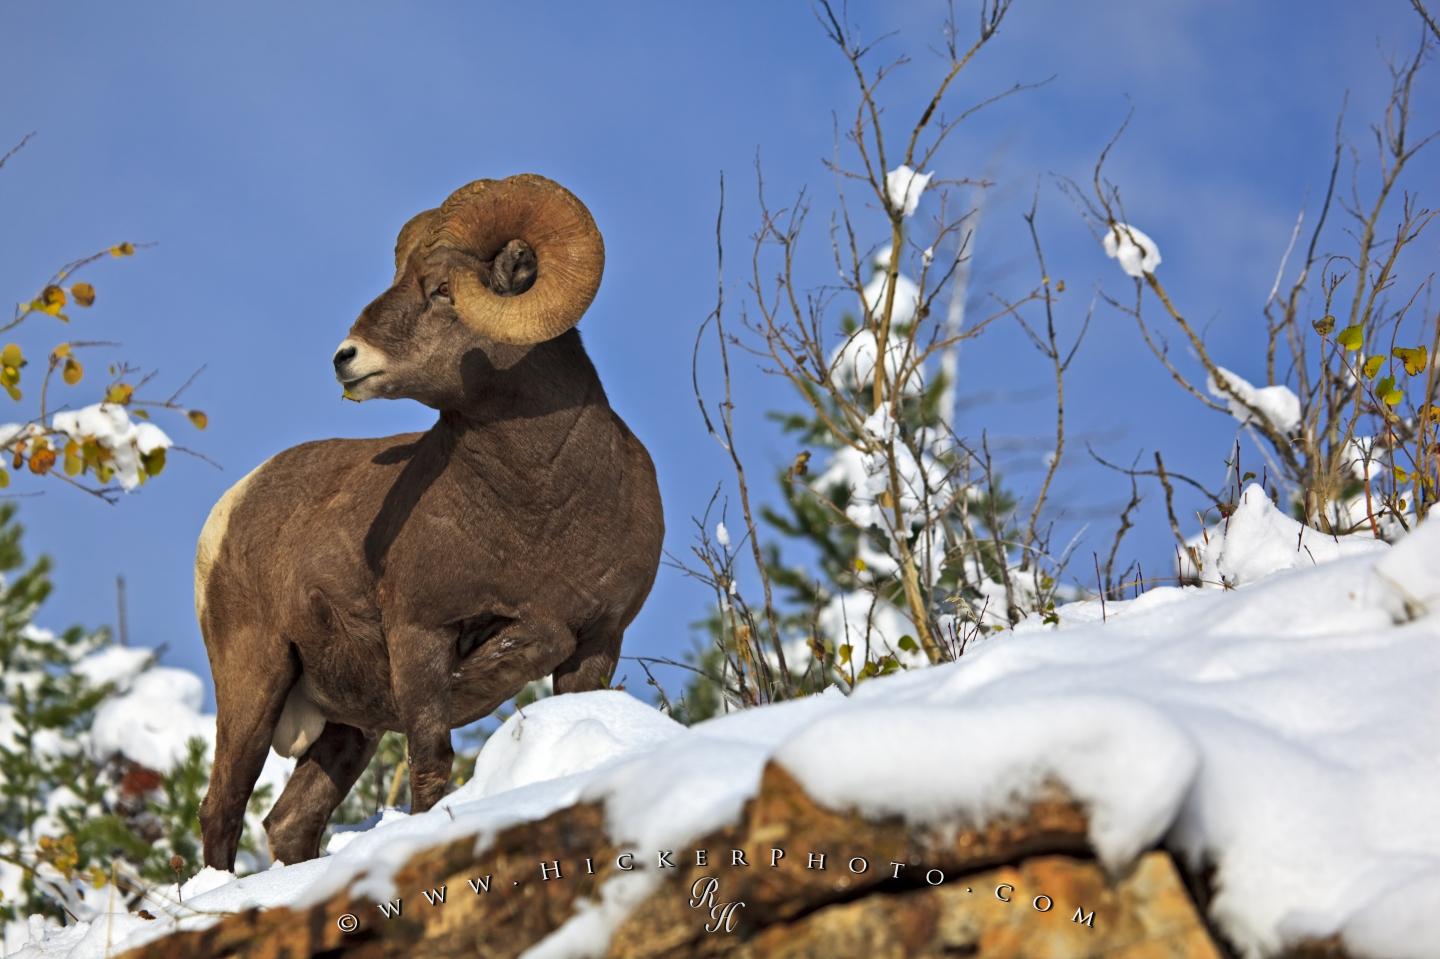 Puter Background This Bighorn Ram Looks Ever Alert As It